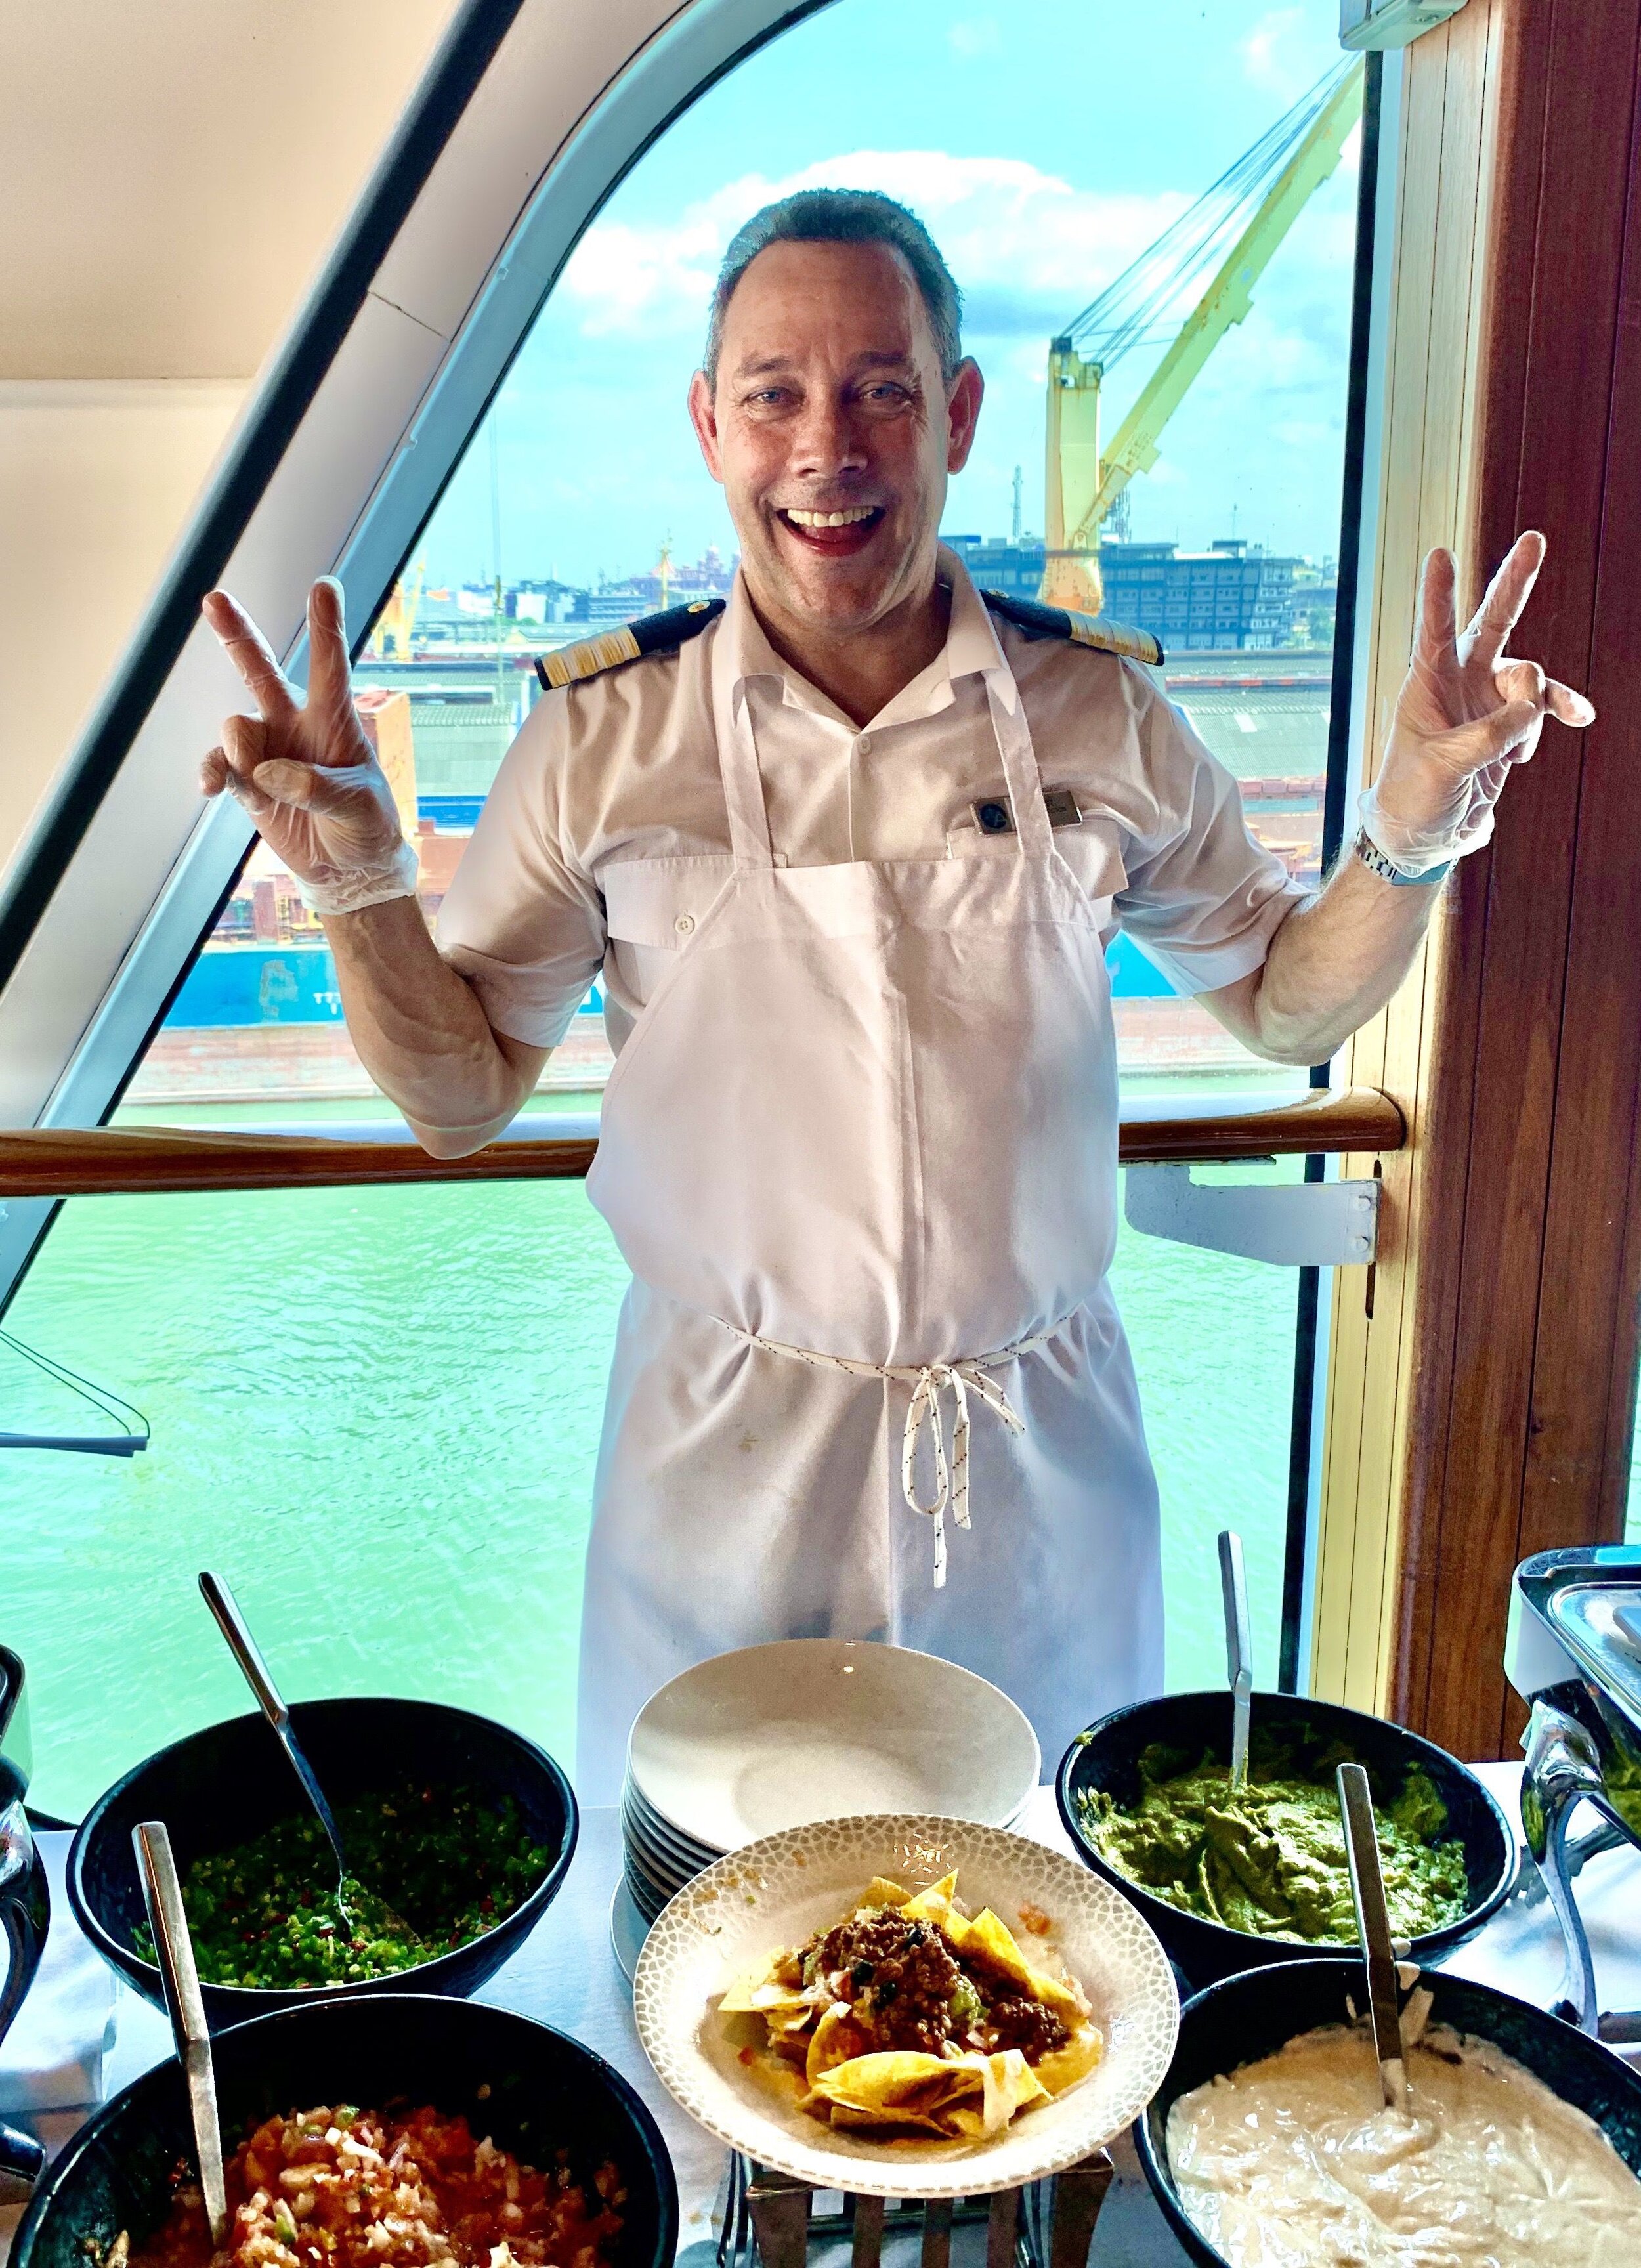 Our fabulous cruise director serving us nachos!